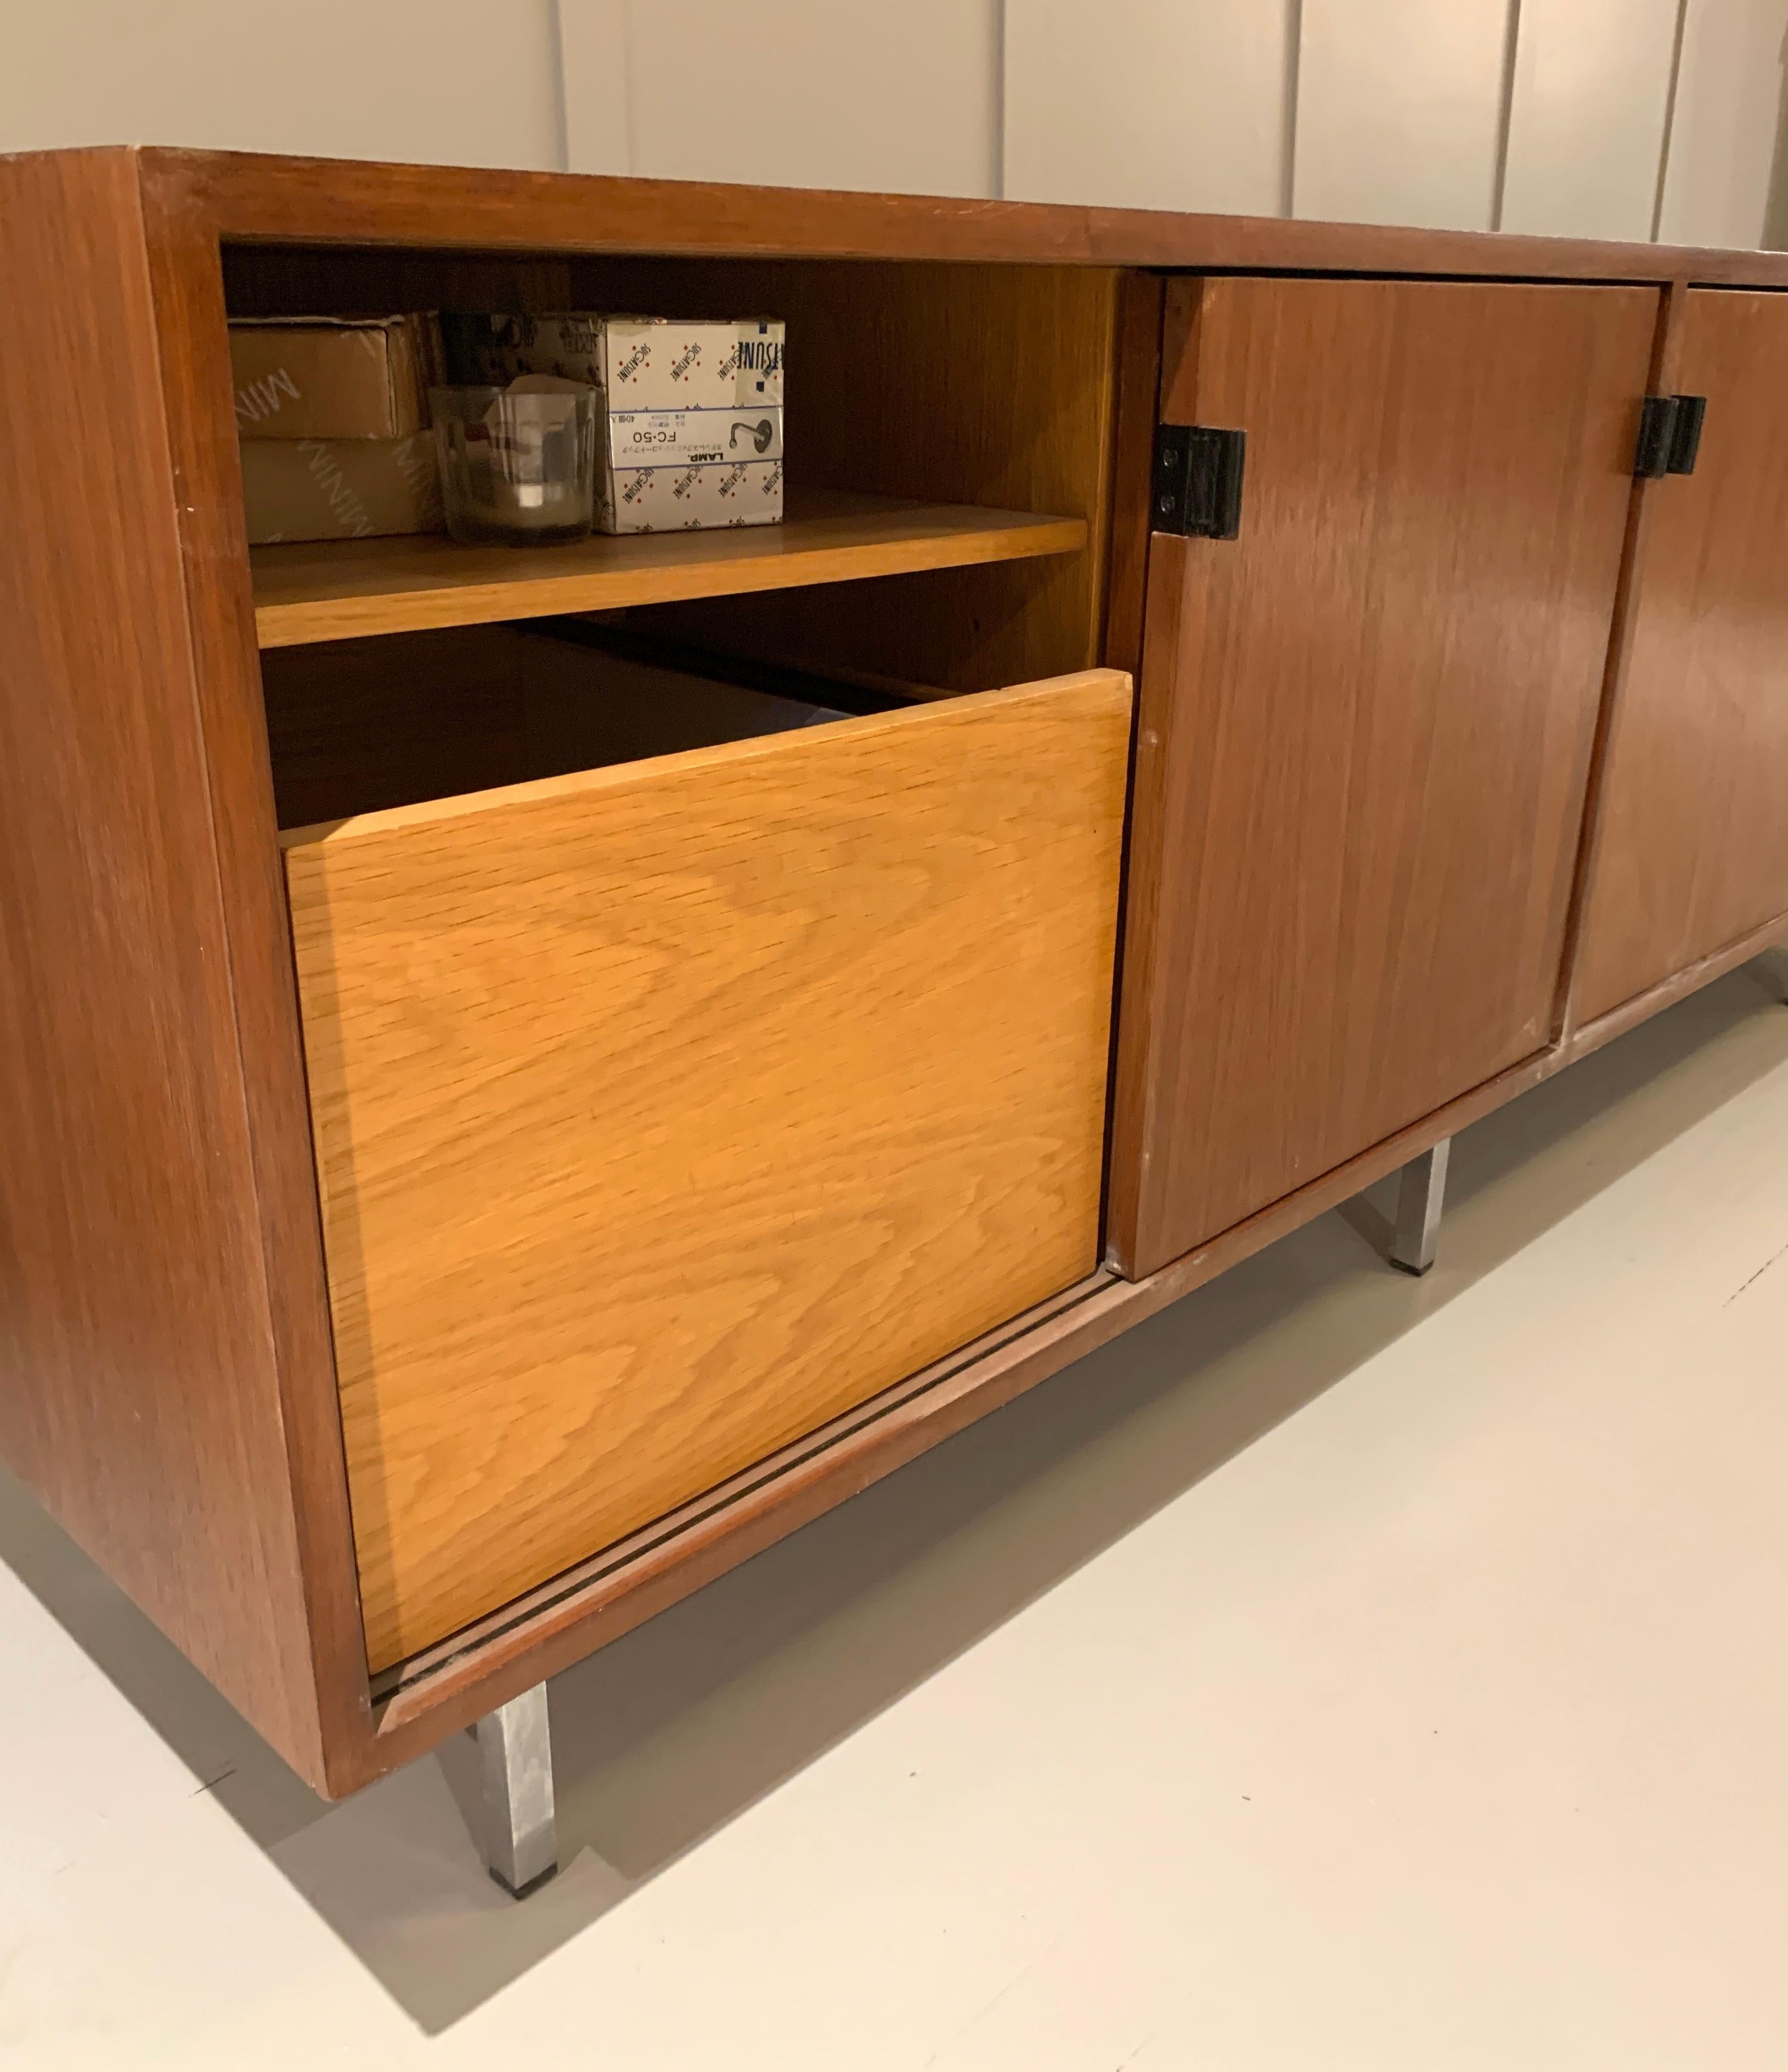 American 1960s Florence Knoll Credenza an Authentic Mid-Century Modern Classic - SALE!!